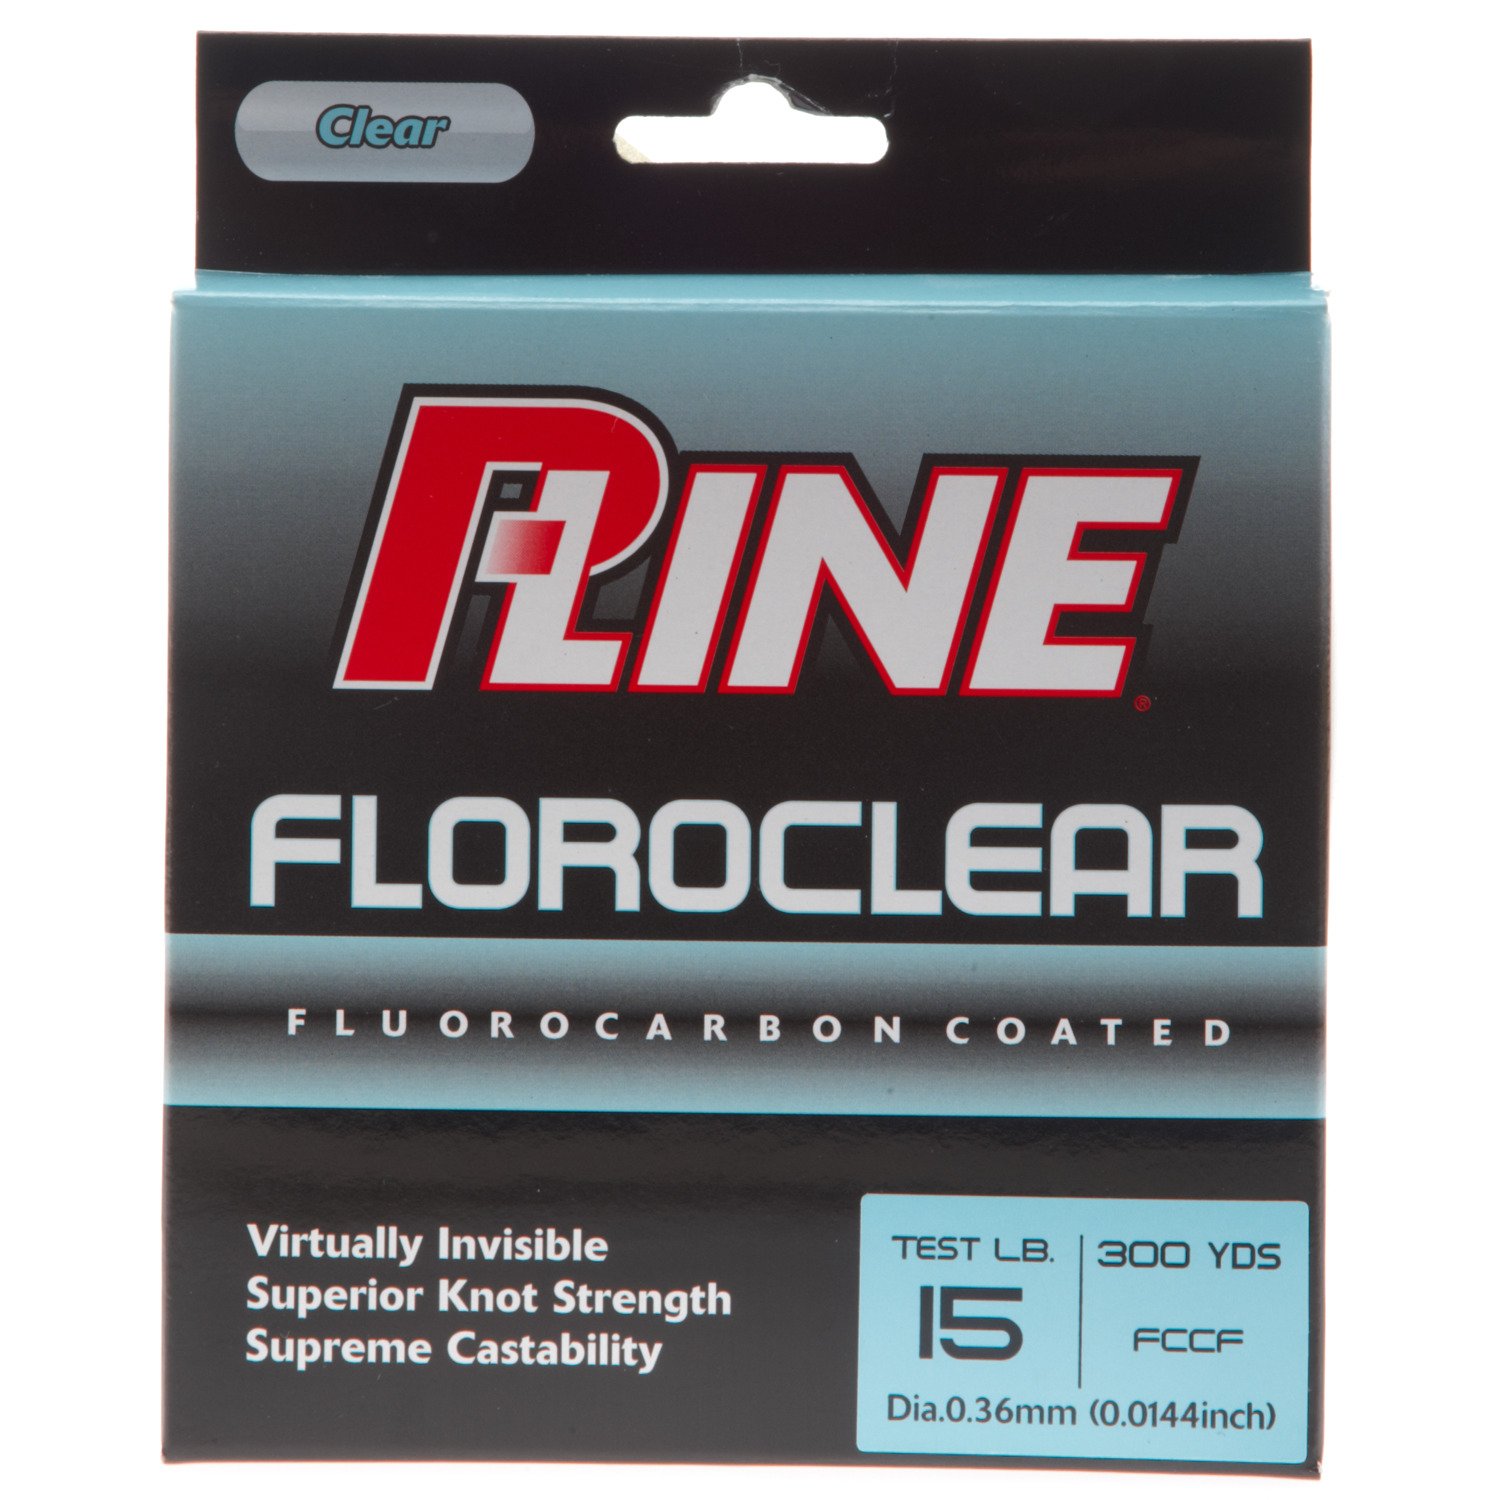 P-Line FCCF-15 Floroclear Fluorocarbon Coated Mono 15lb 300yd - Black Sheep  Sporting Goods